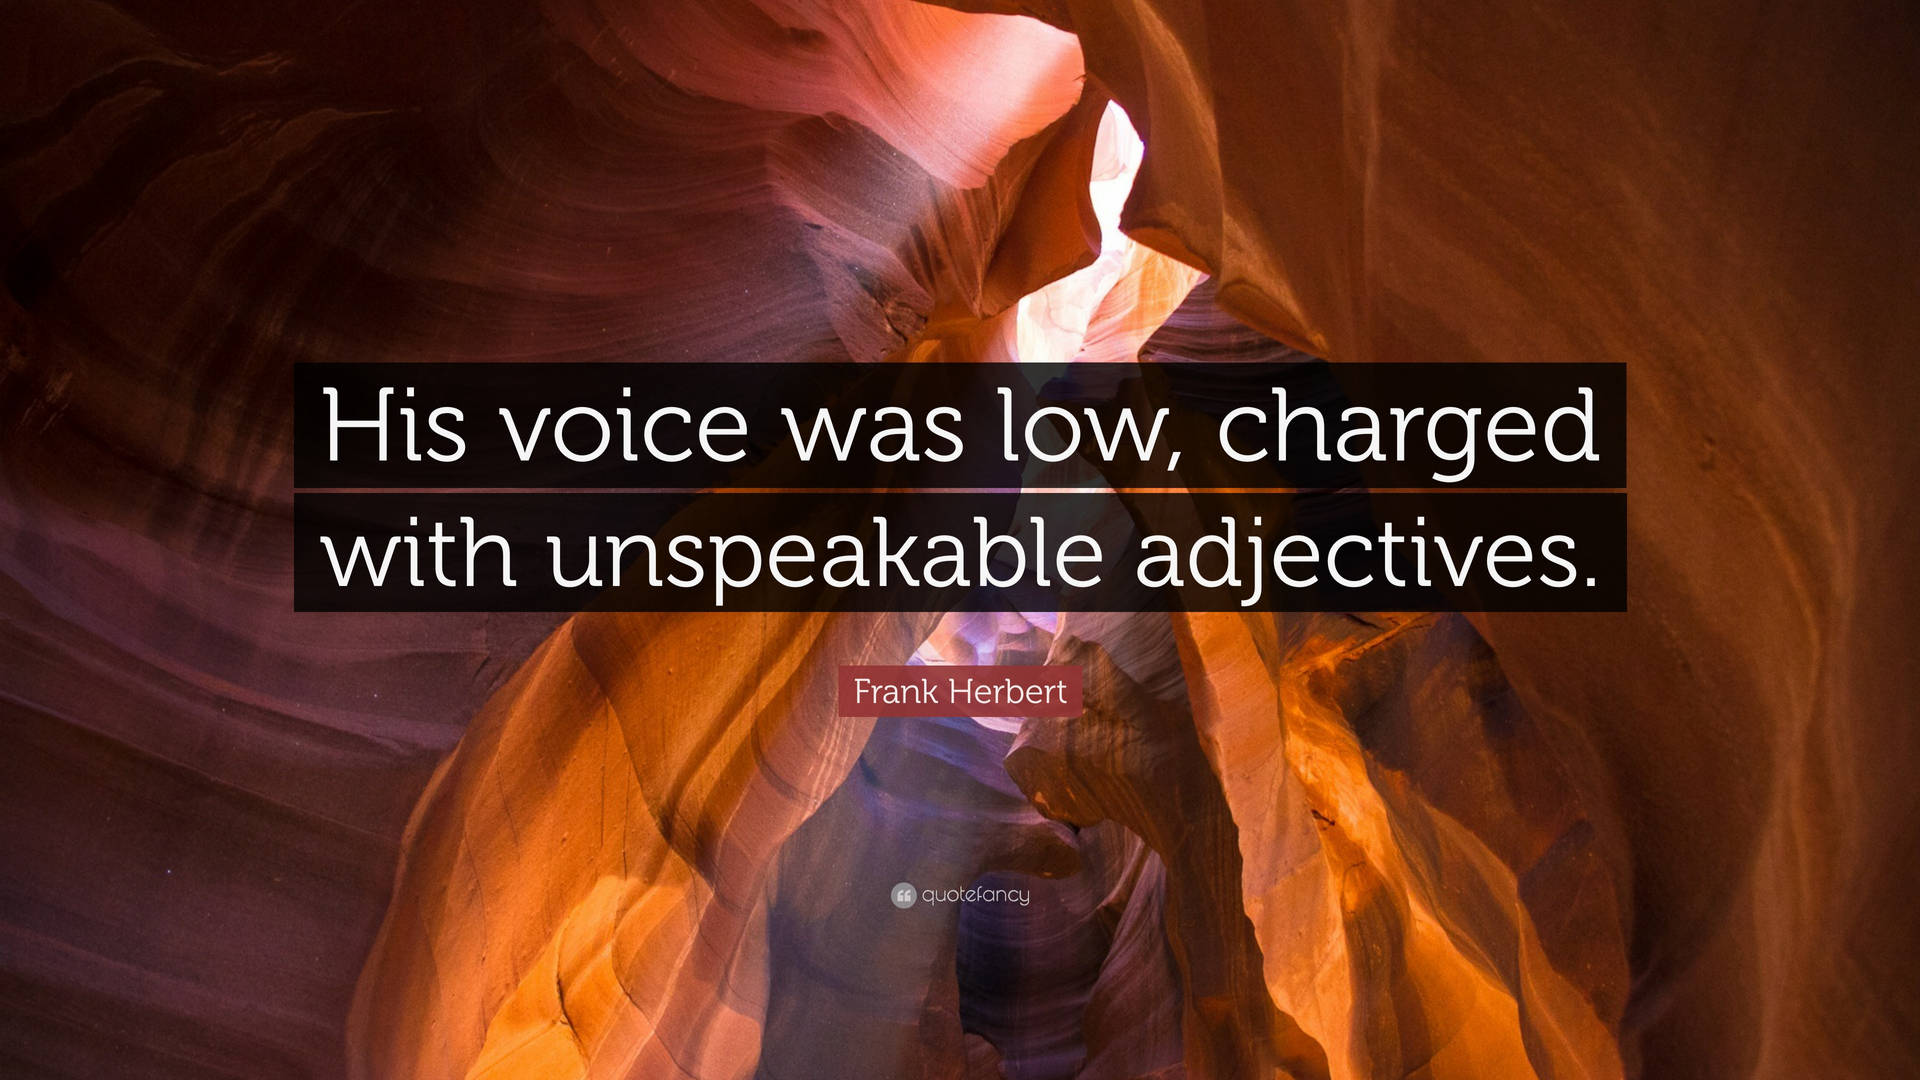 Unspeakable – Embracing The Power Of The Male Voice Background